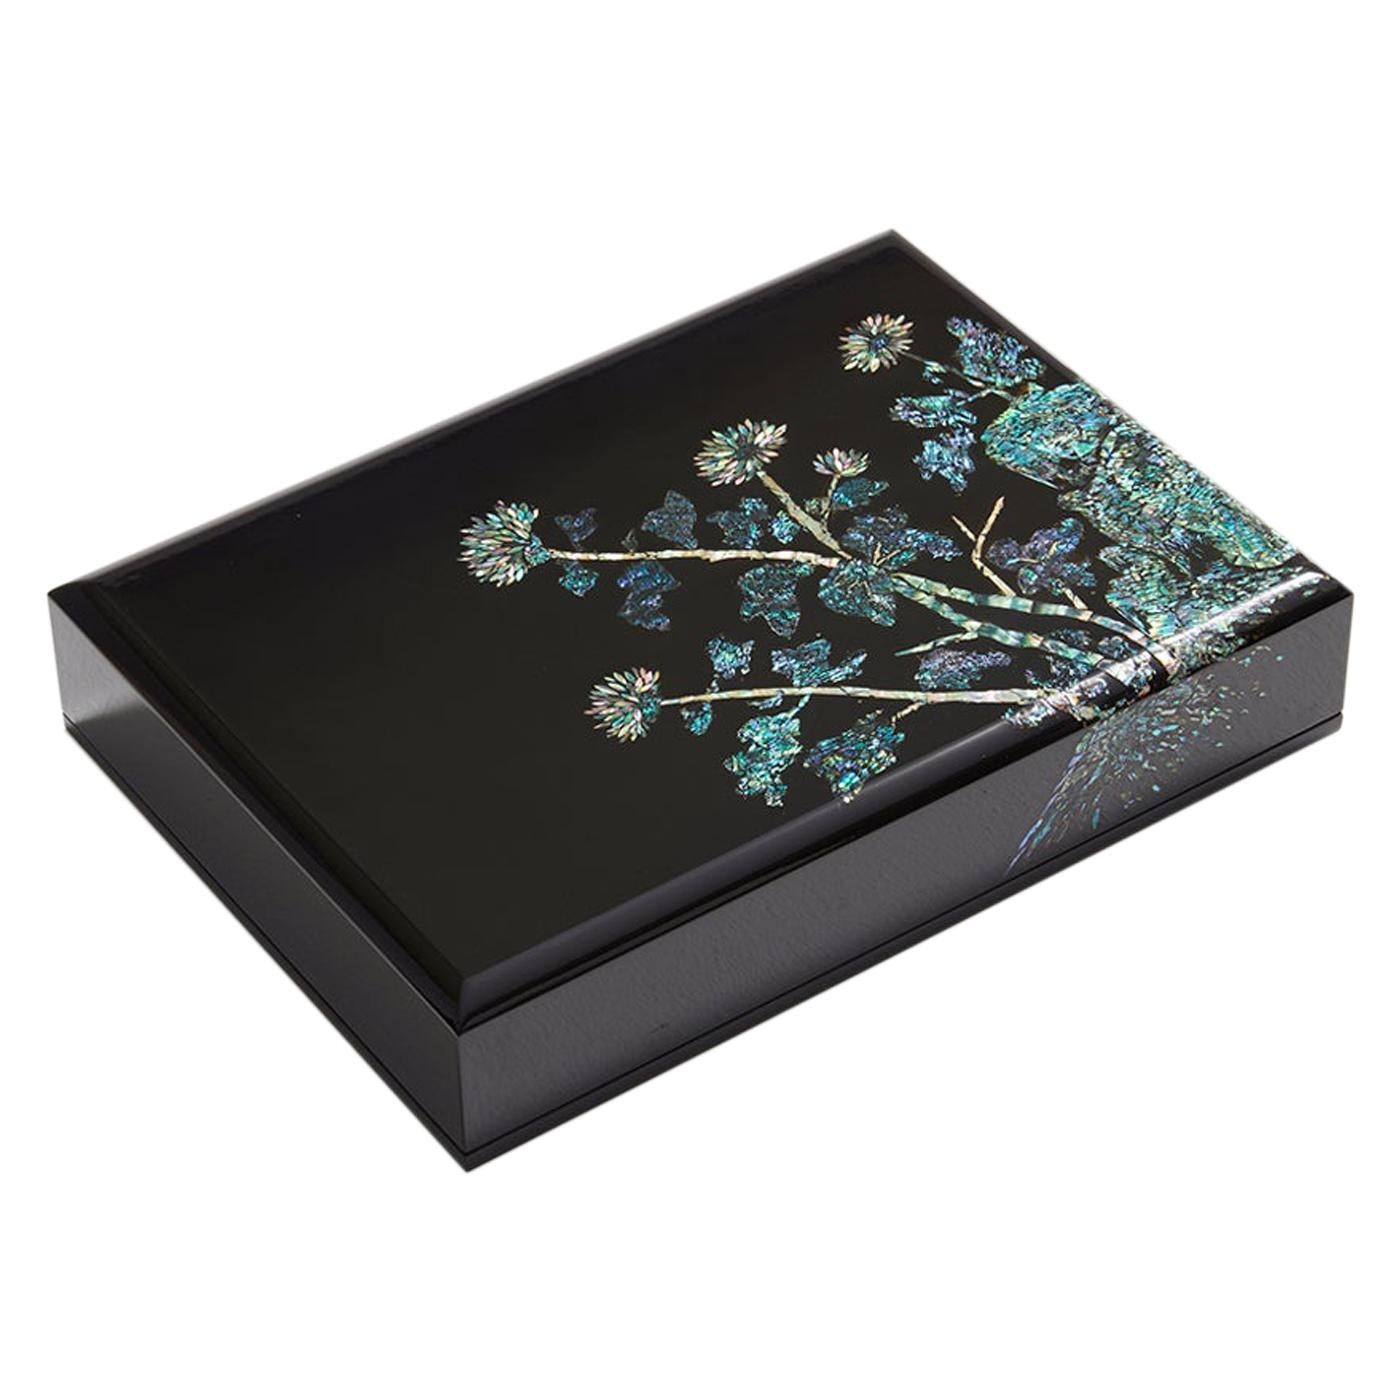 Mother of Pearl Lacquer Box with Chrysanthemum Flowers Design by Arijian